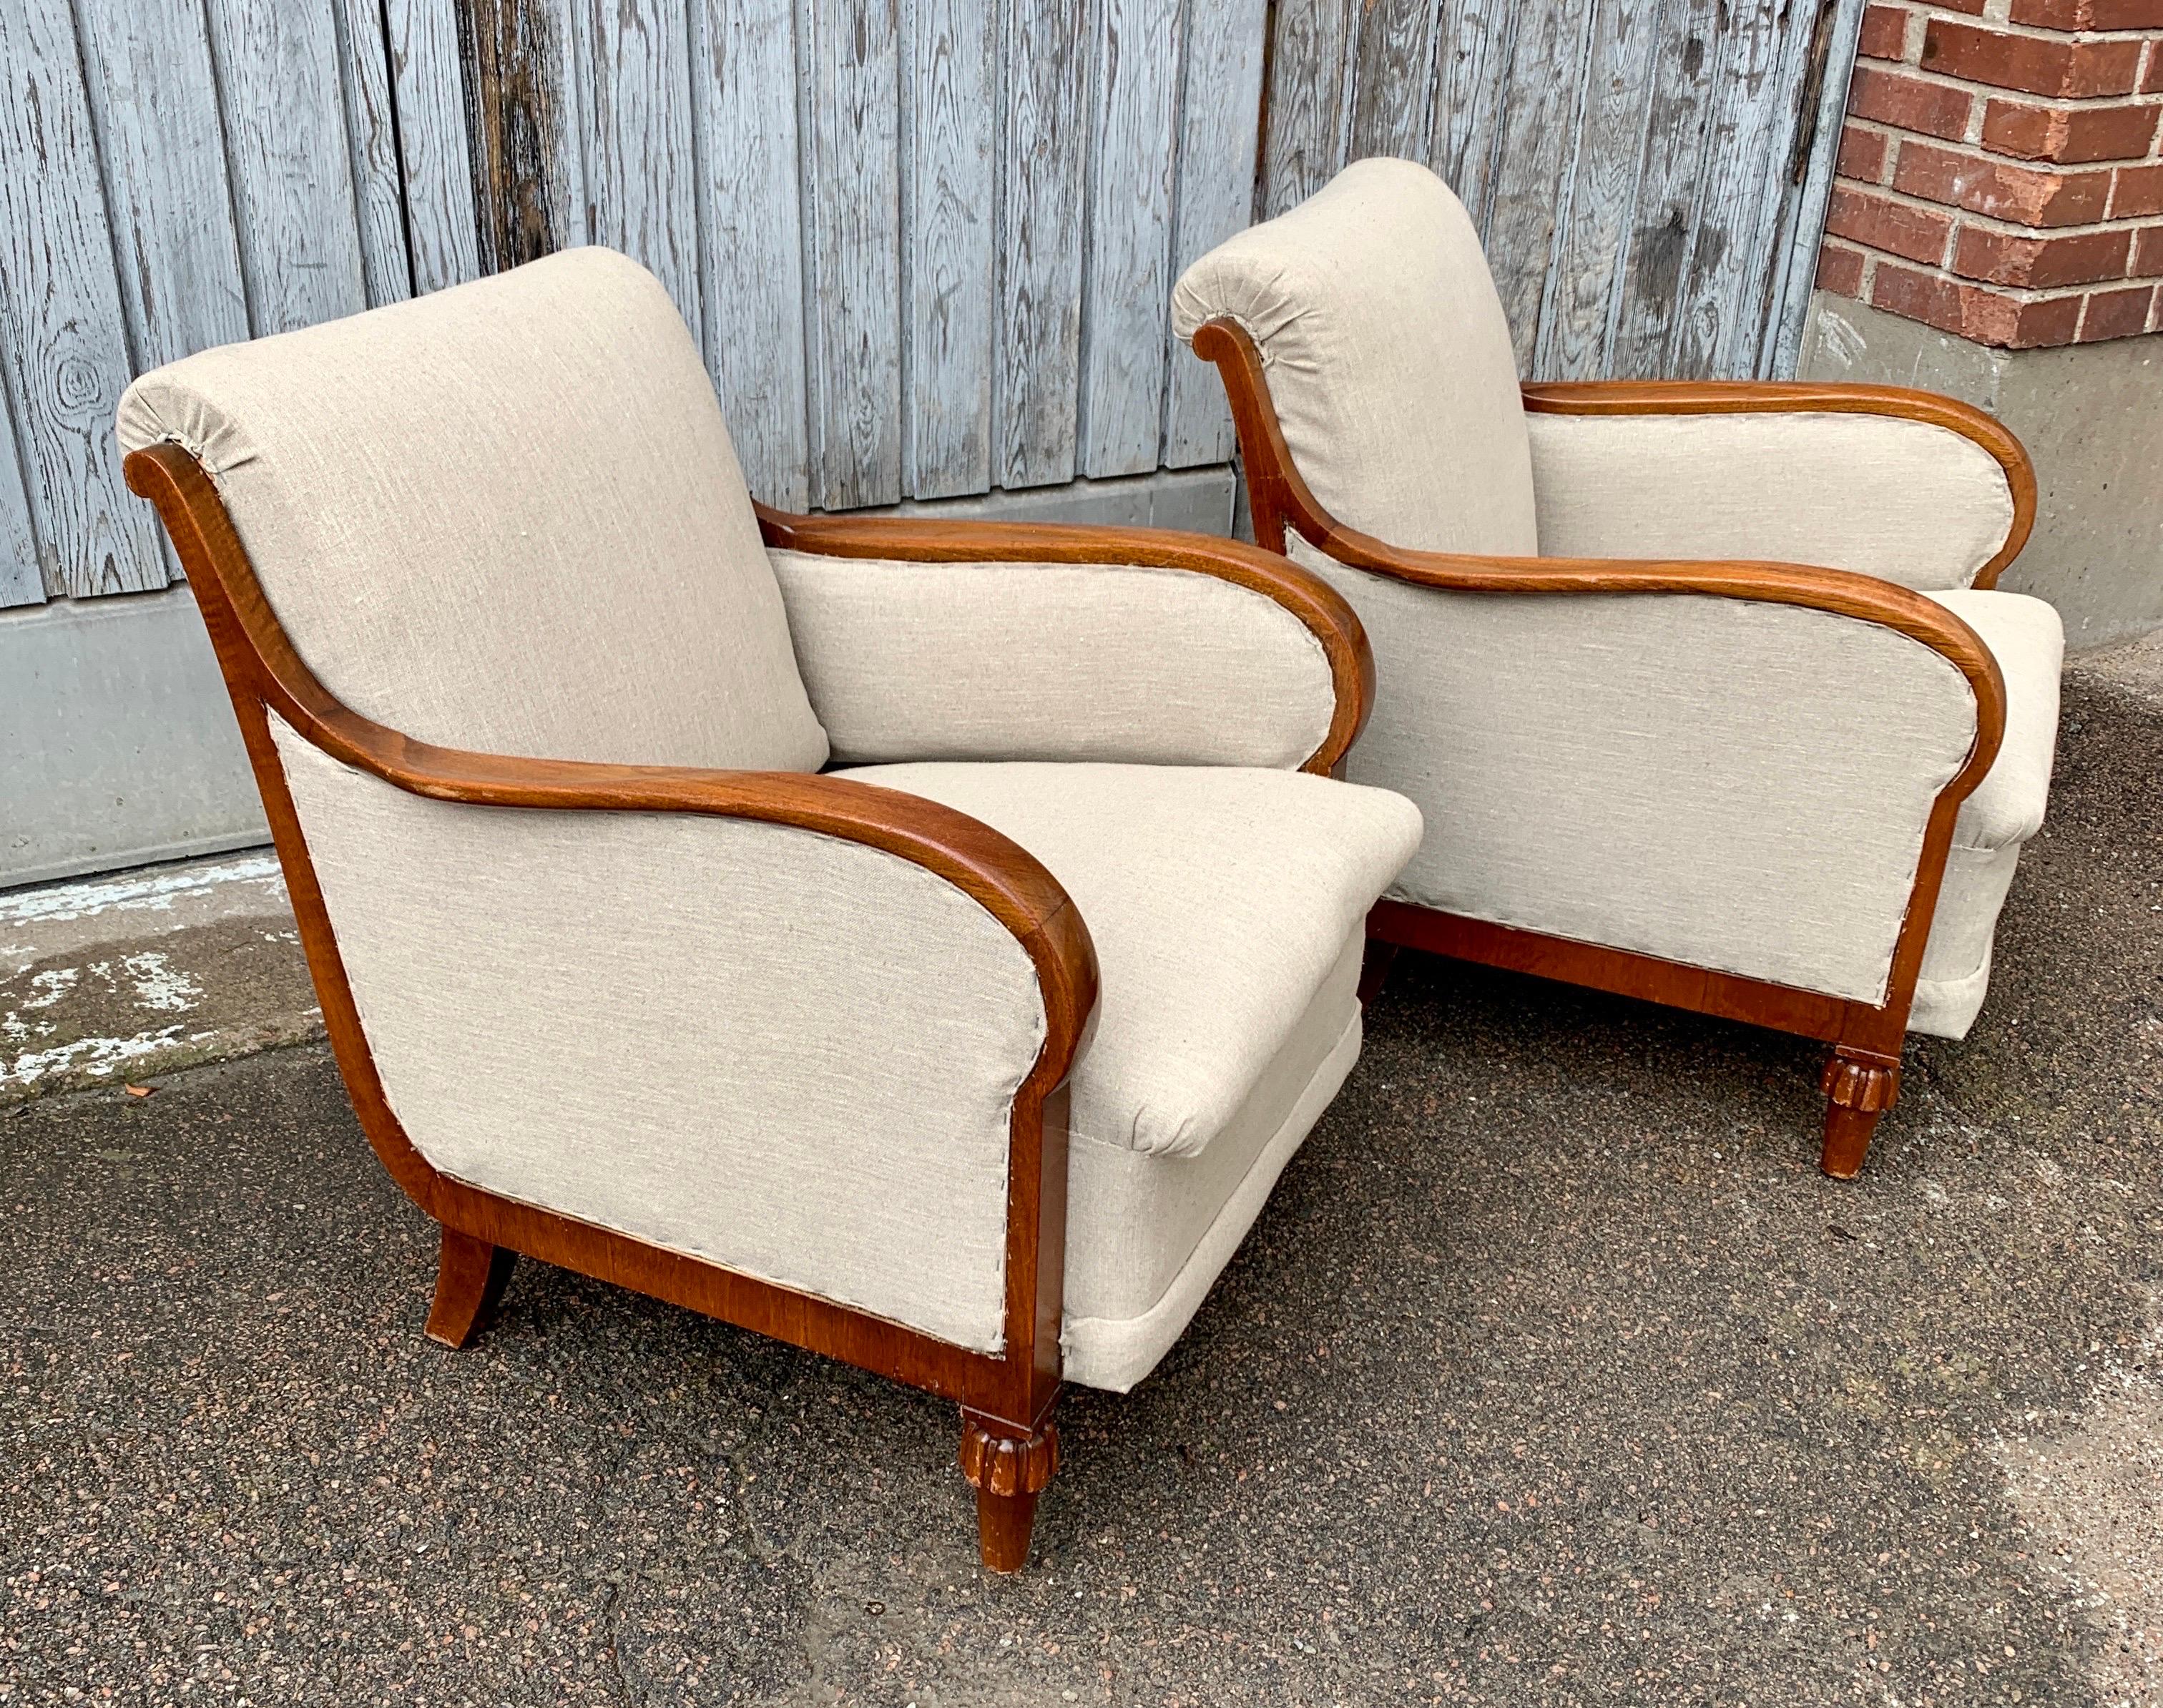 Pair of stylish, as well as comfortable, Swedish Grace club or lounge chairs in beige fabric with formed wooden armrests from the first part of the 20th Century. This important period of Swedish furniture design research not only has the look and